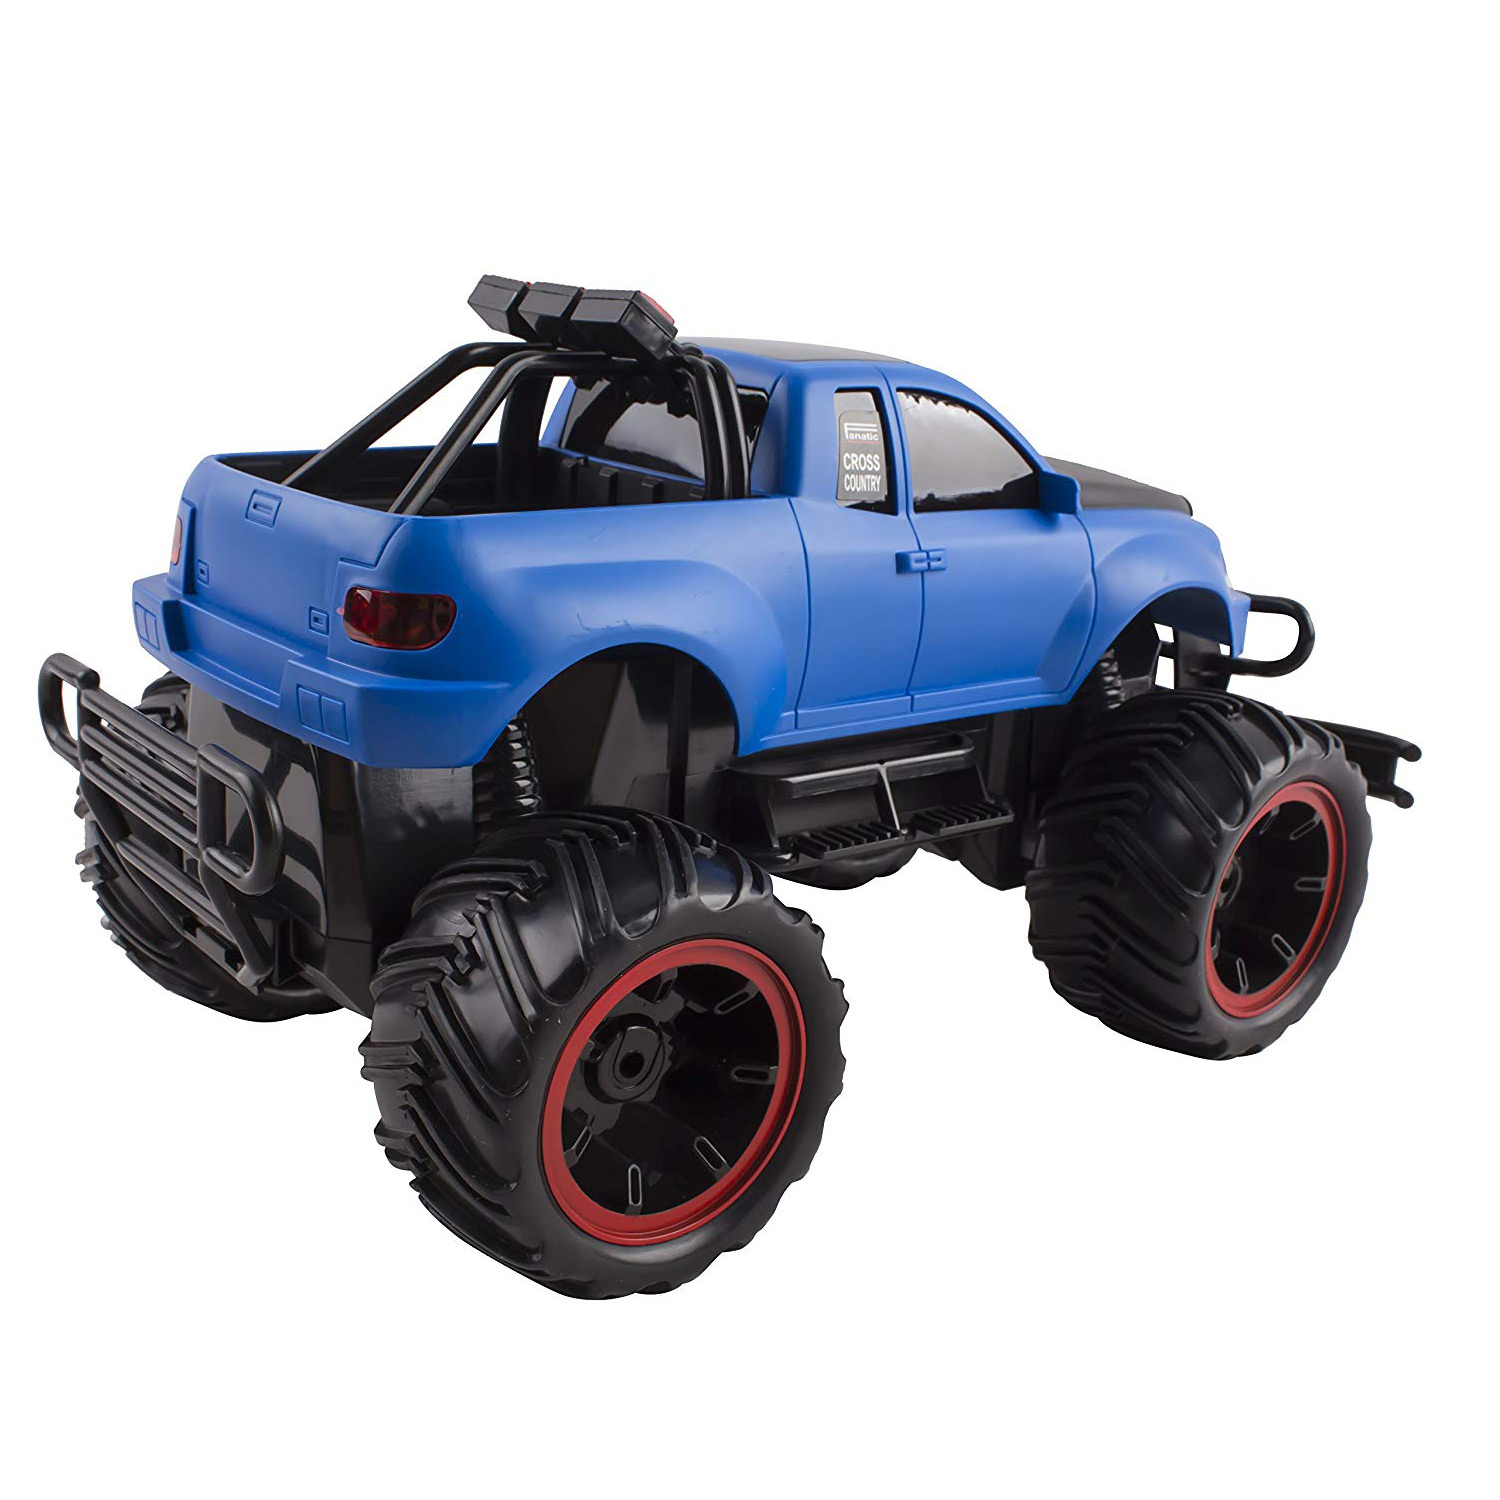 RC Monster Truck Buggy Remote Control Car RTR Electric Truggy Vehicle 116 Large Scale Working Suspension Perfect Kids Off-Road Race Toy Blue